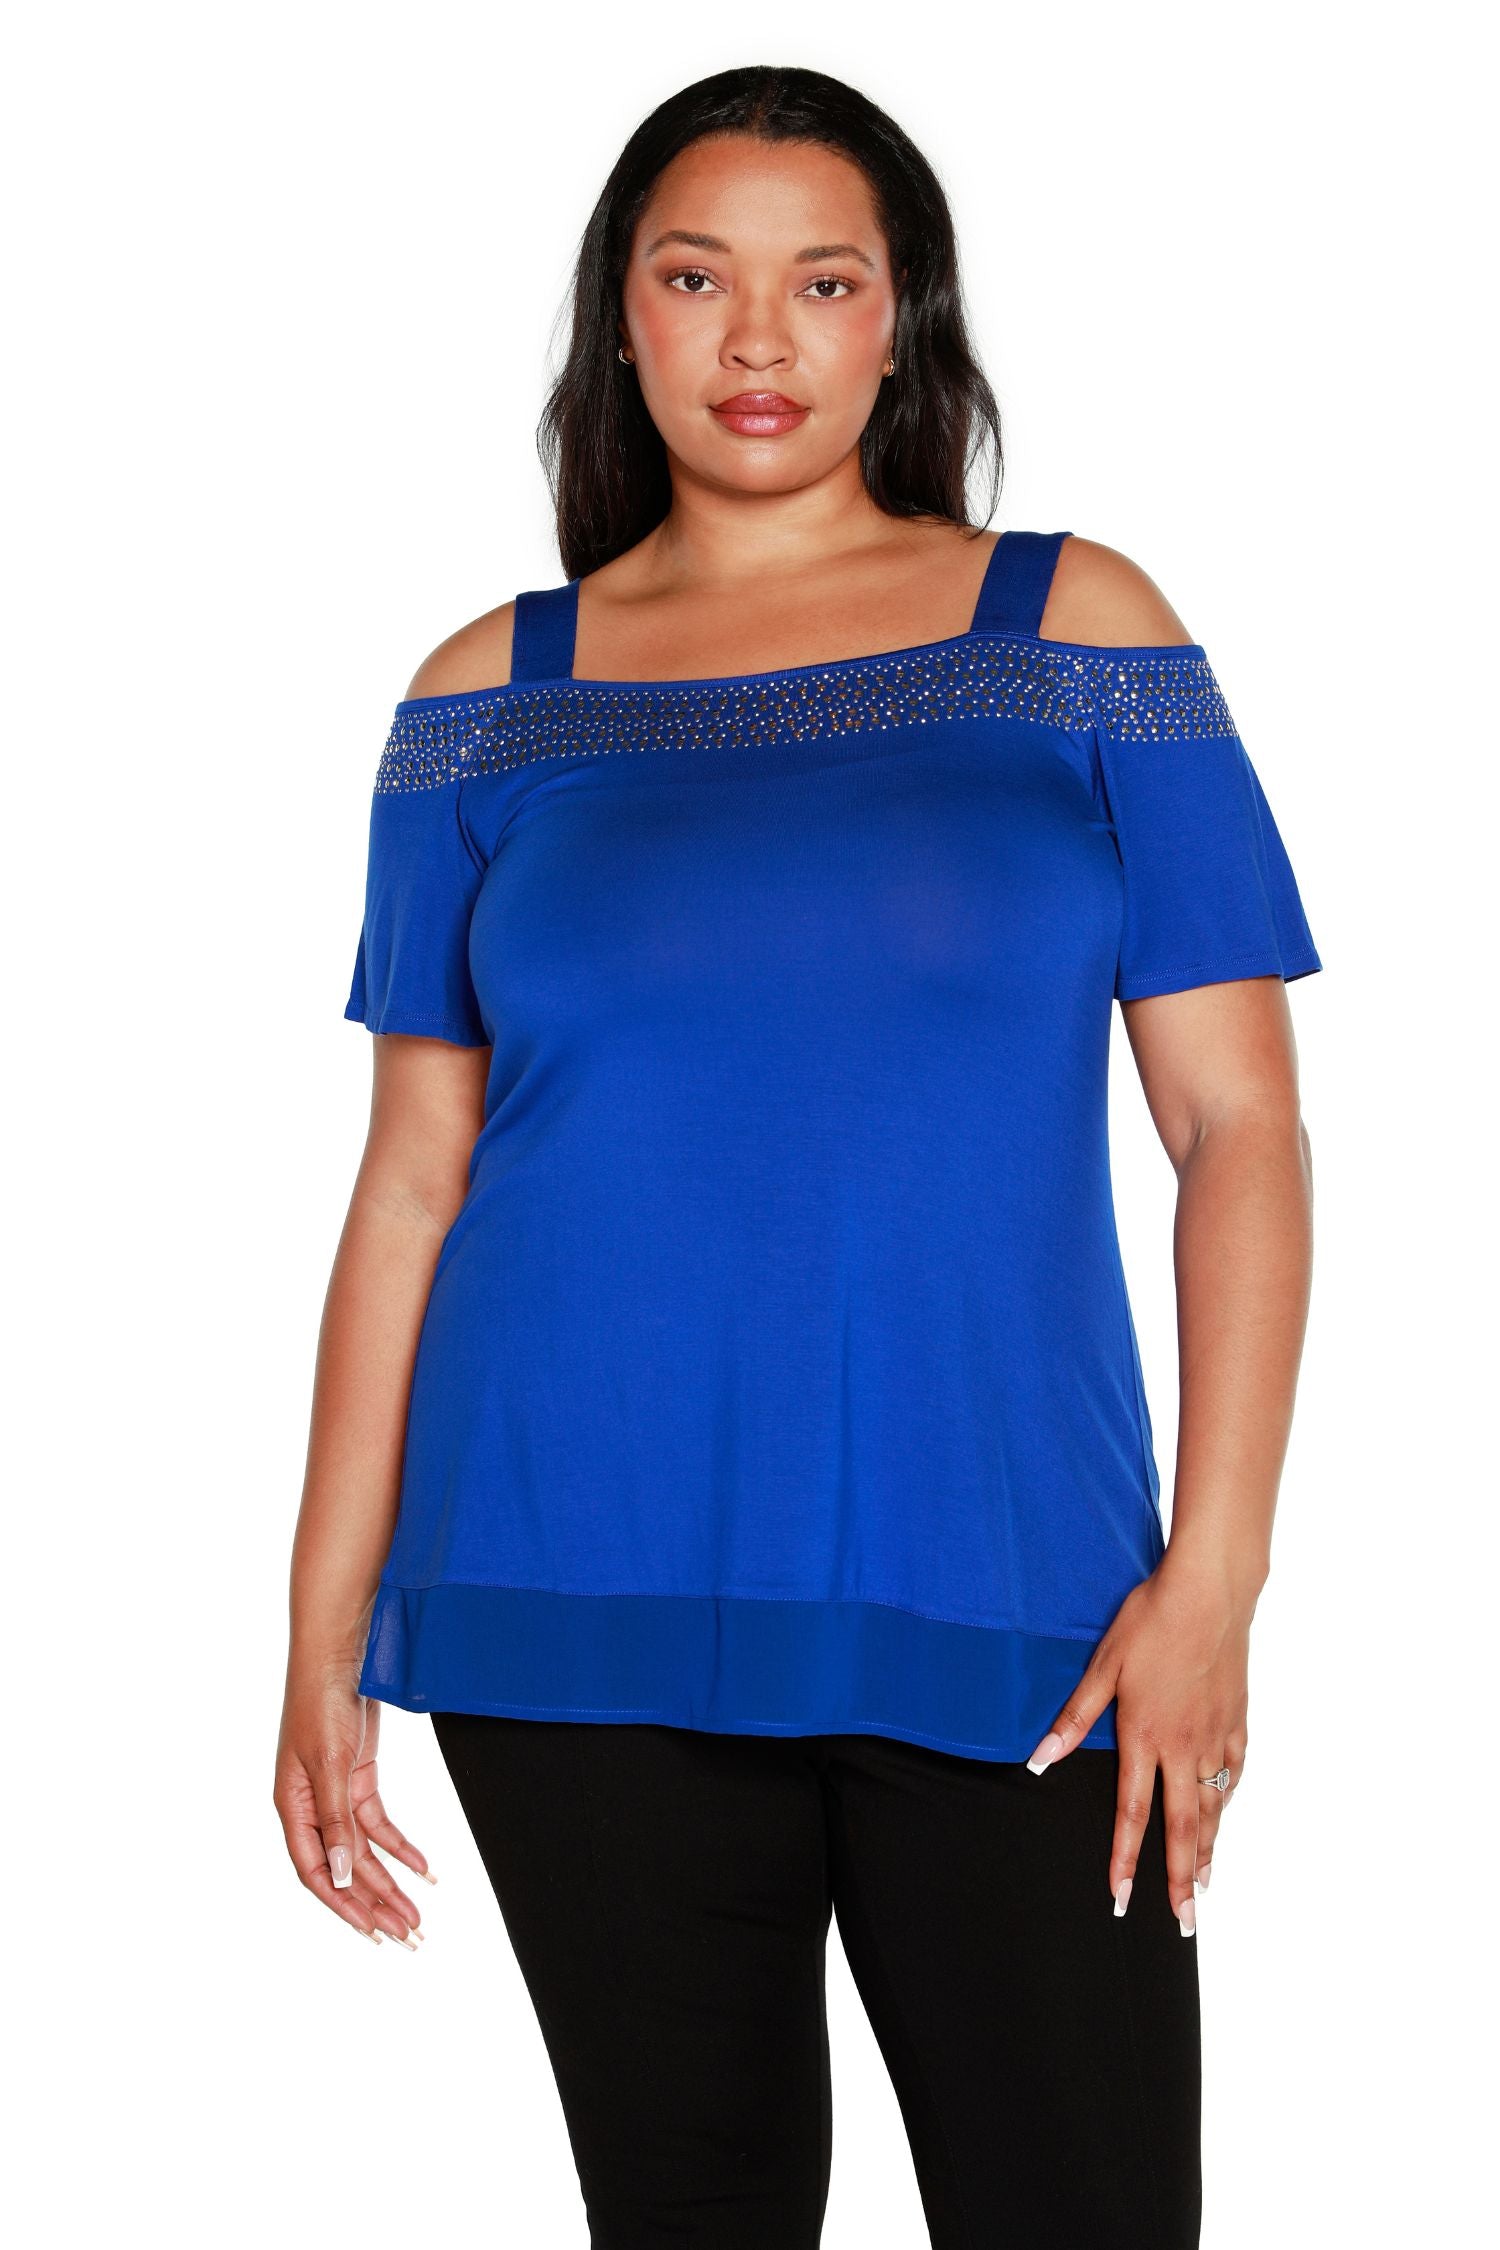 Women's Flutter Sleeve Cold Shoulder Pull Over Top with Stud and Sequin Trim | Curvy